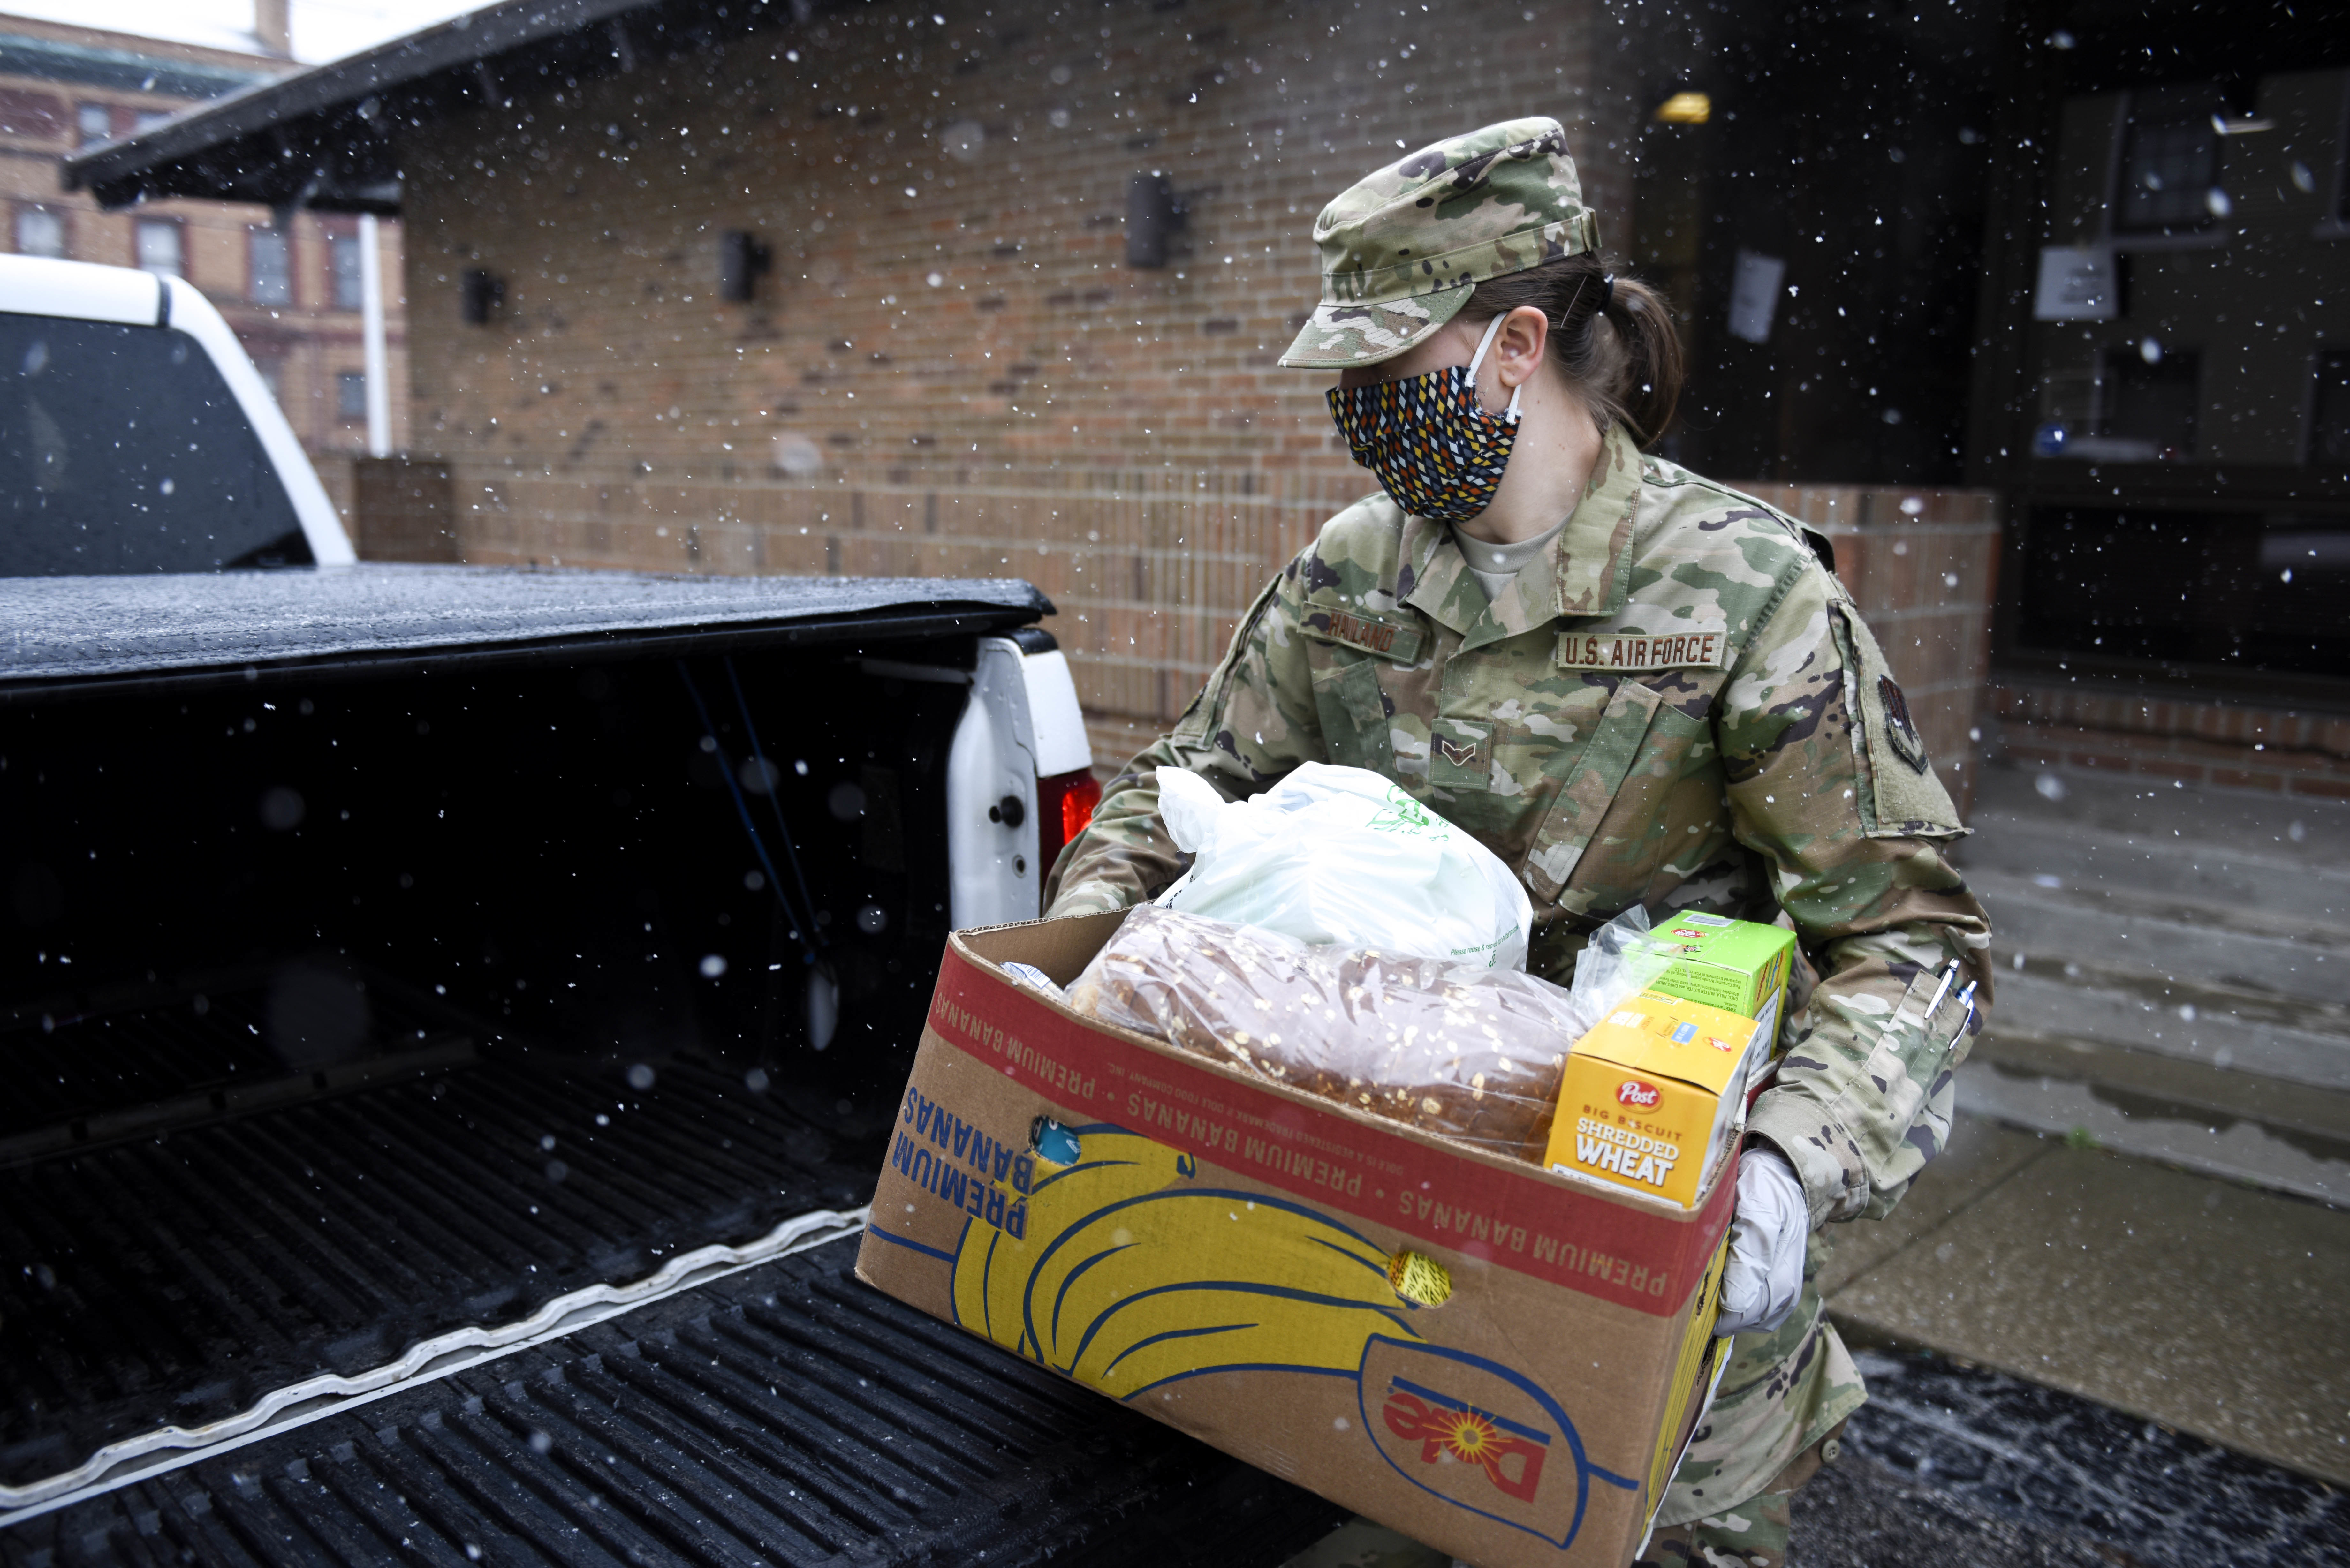 FEmale soldier loads box into back of a truck in the snow.